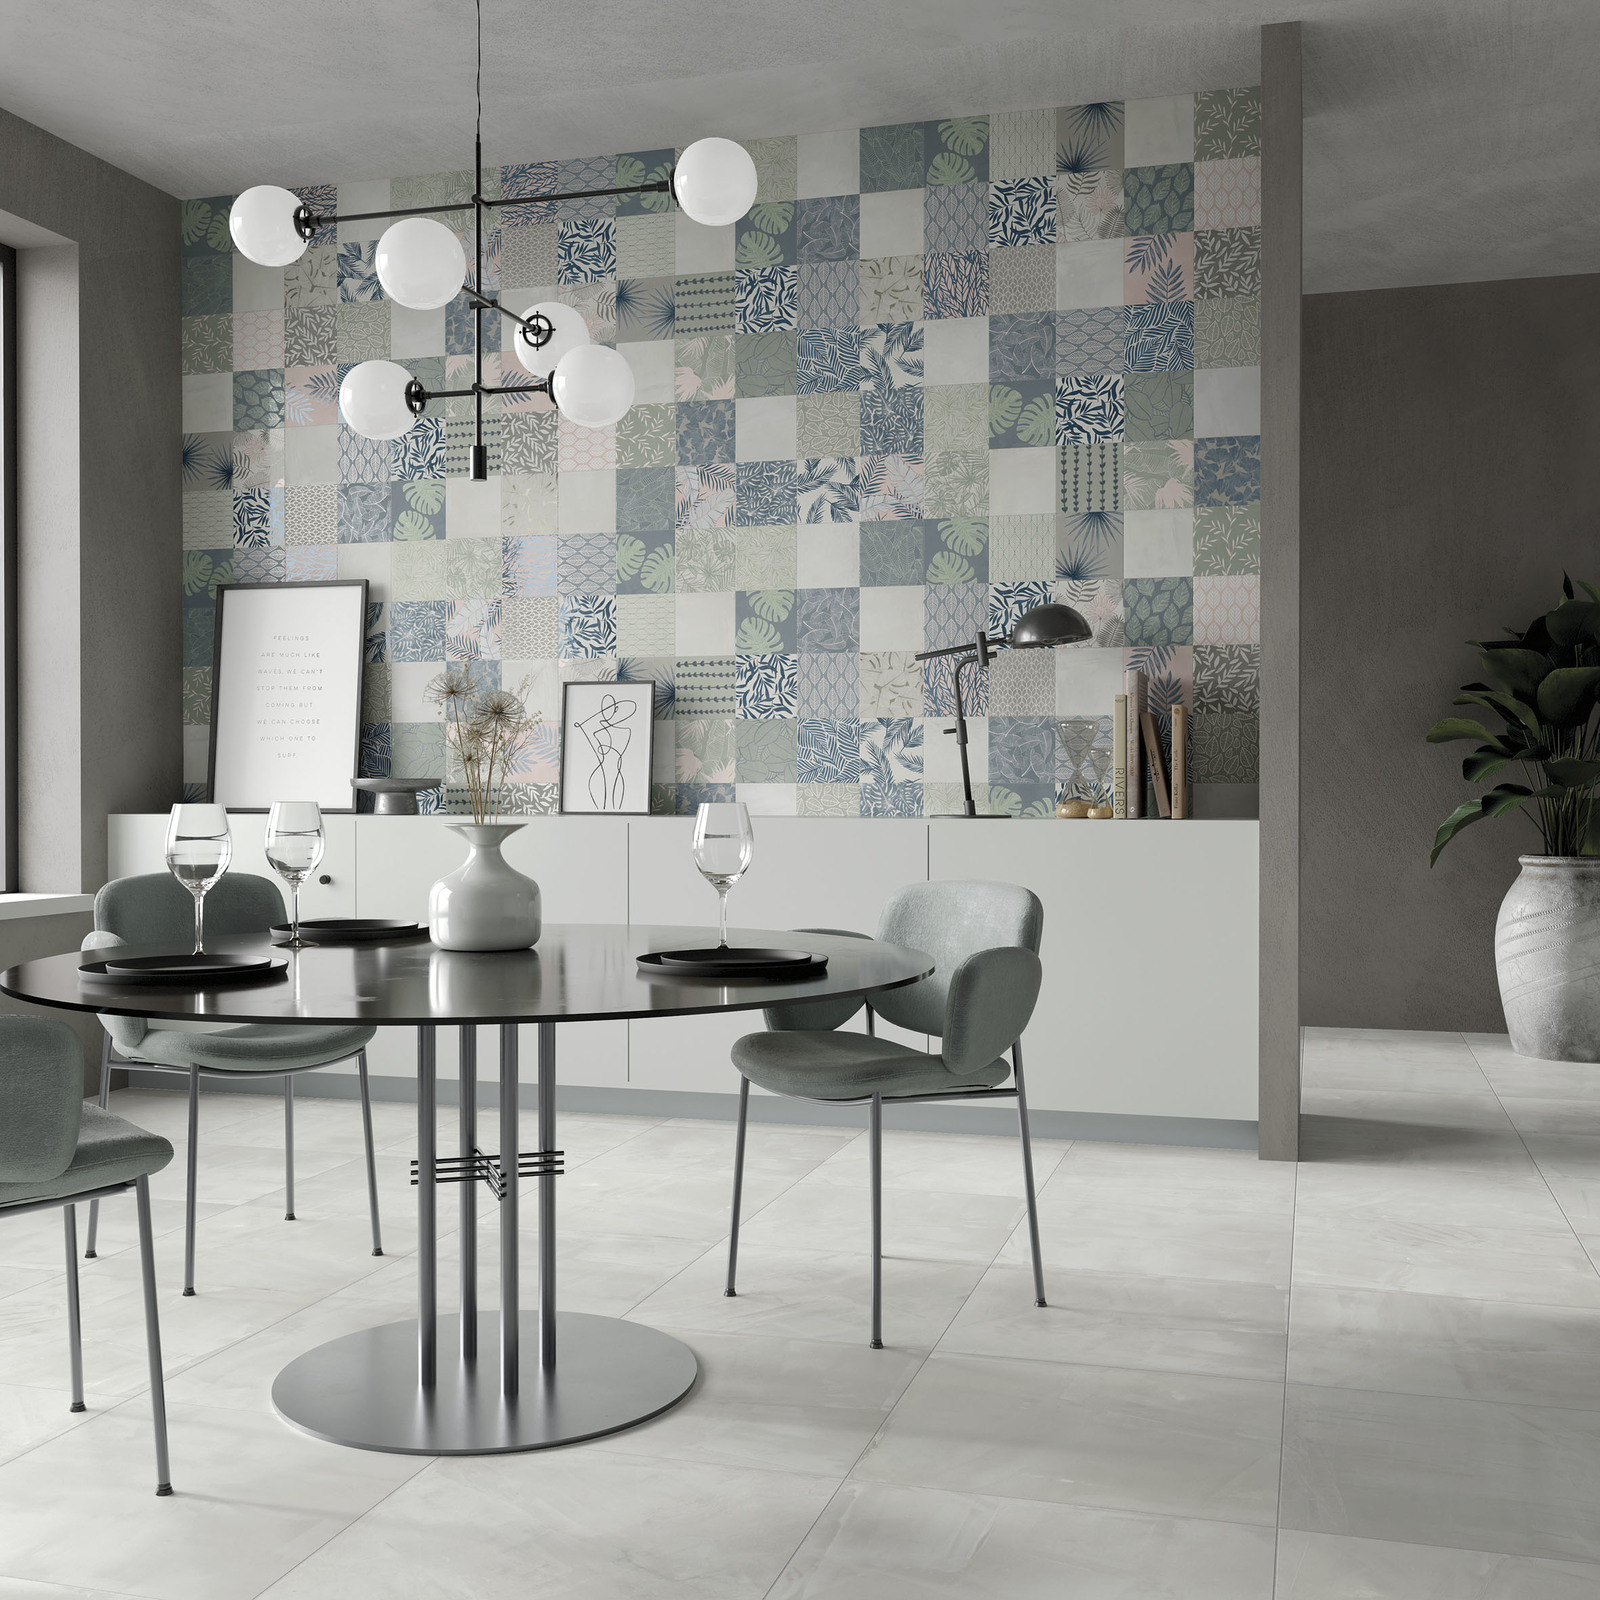 Porcelain tile floor and wall tile Paint White R10 series by Dado Ceramica
